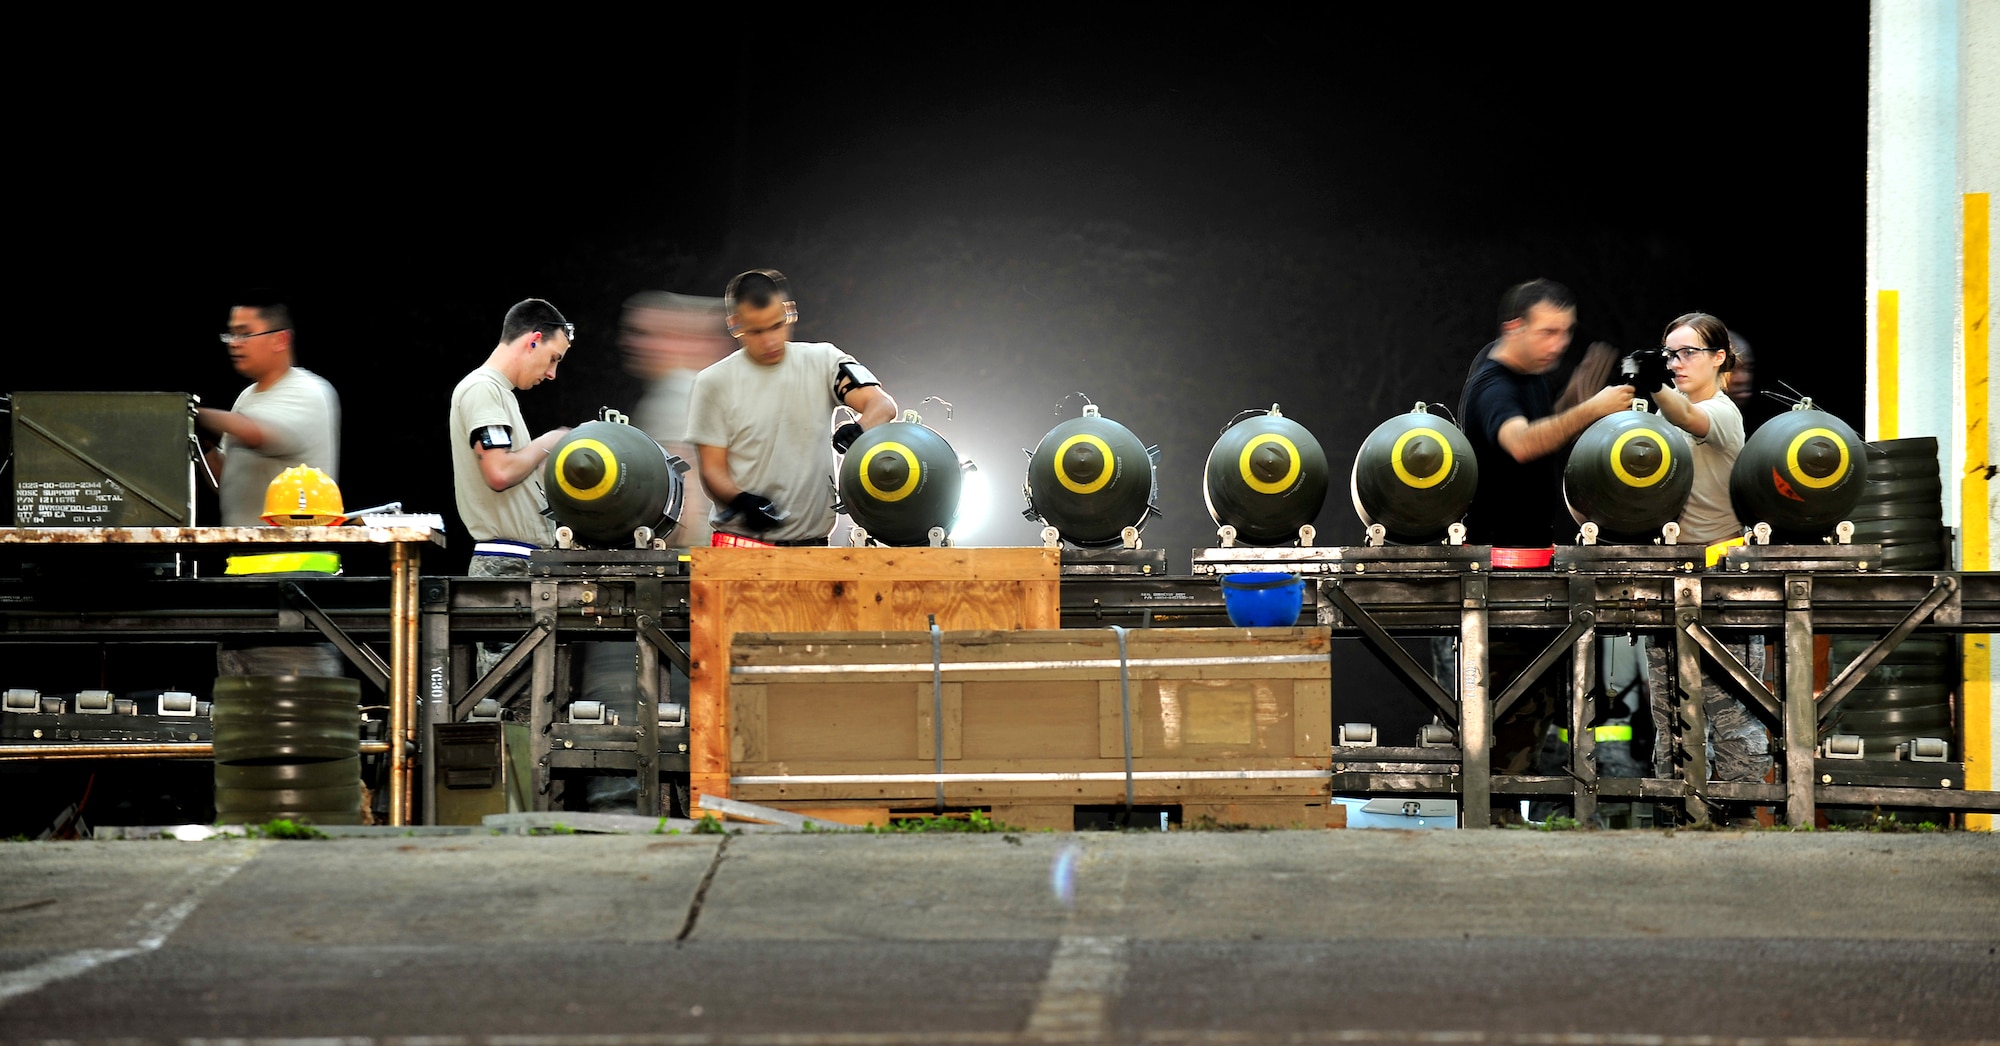 Airmen from the 18th Munitions Squadron build Mark 83 bomb bodies during Beverly High 10-02 at Kadena Air Base, Japan, March 24. The 18th Wing is participating in a Local Operational Readiness Exercise March 22-26 to test the readiness of Kadena Airmen. (U.S. Air Force photo/Tech. Sgt. Rey Ramon)   